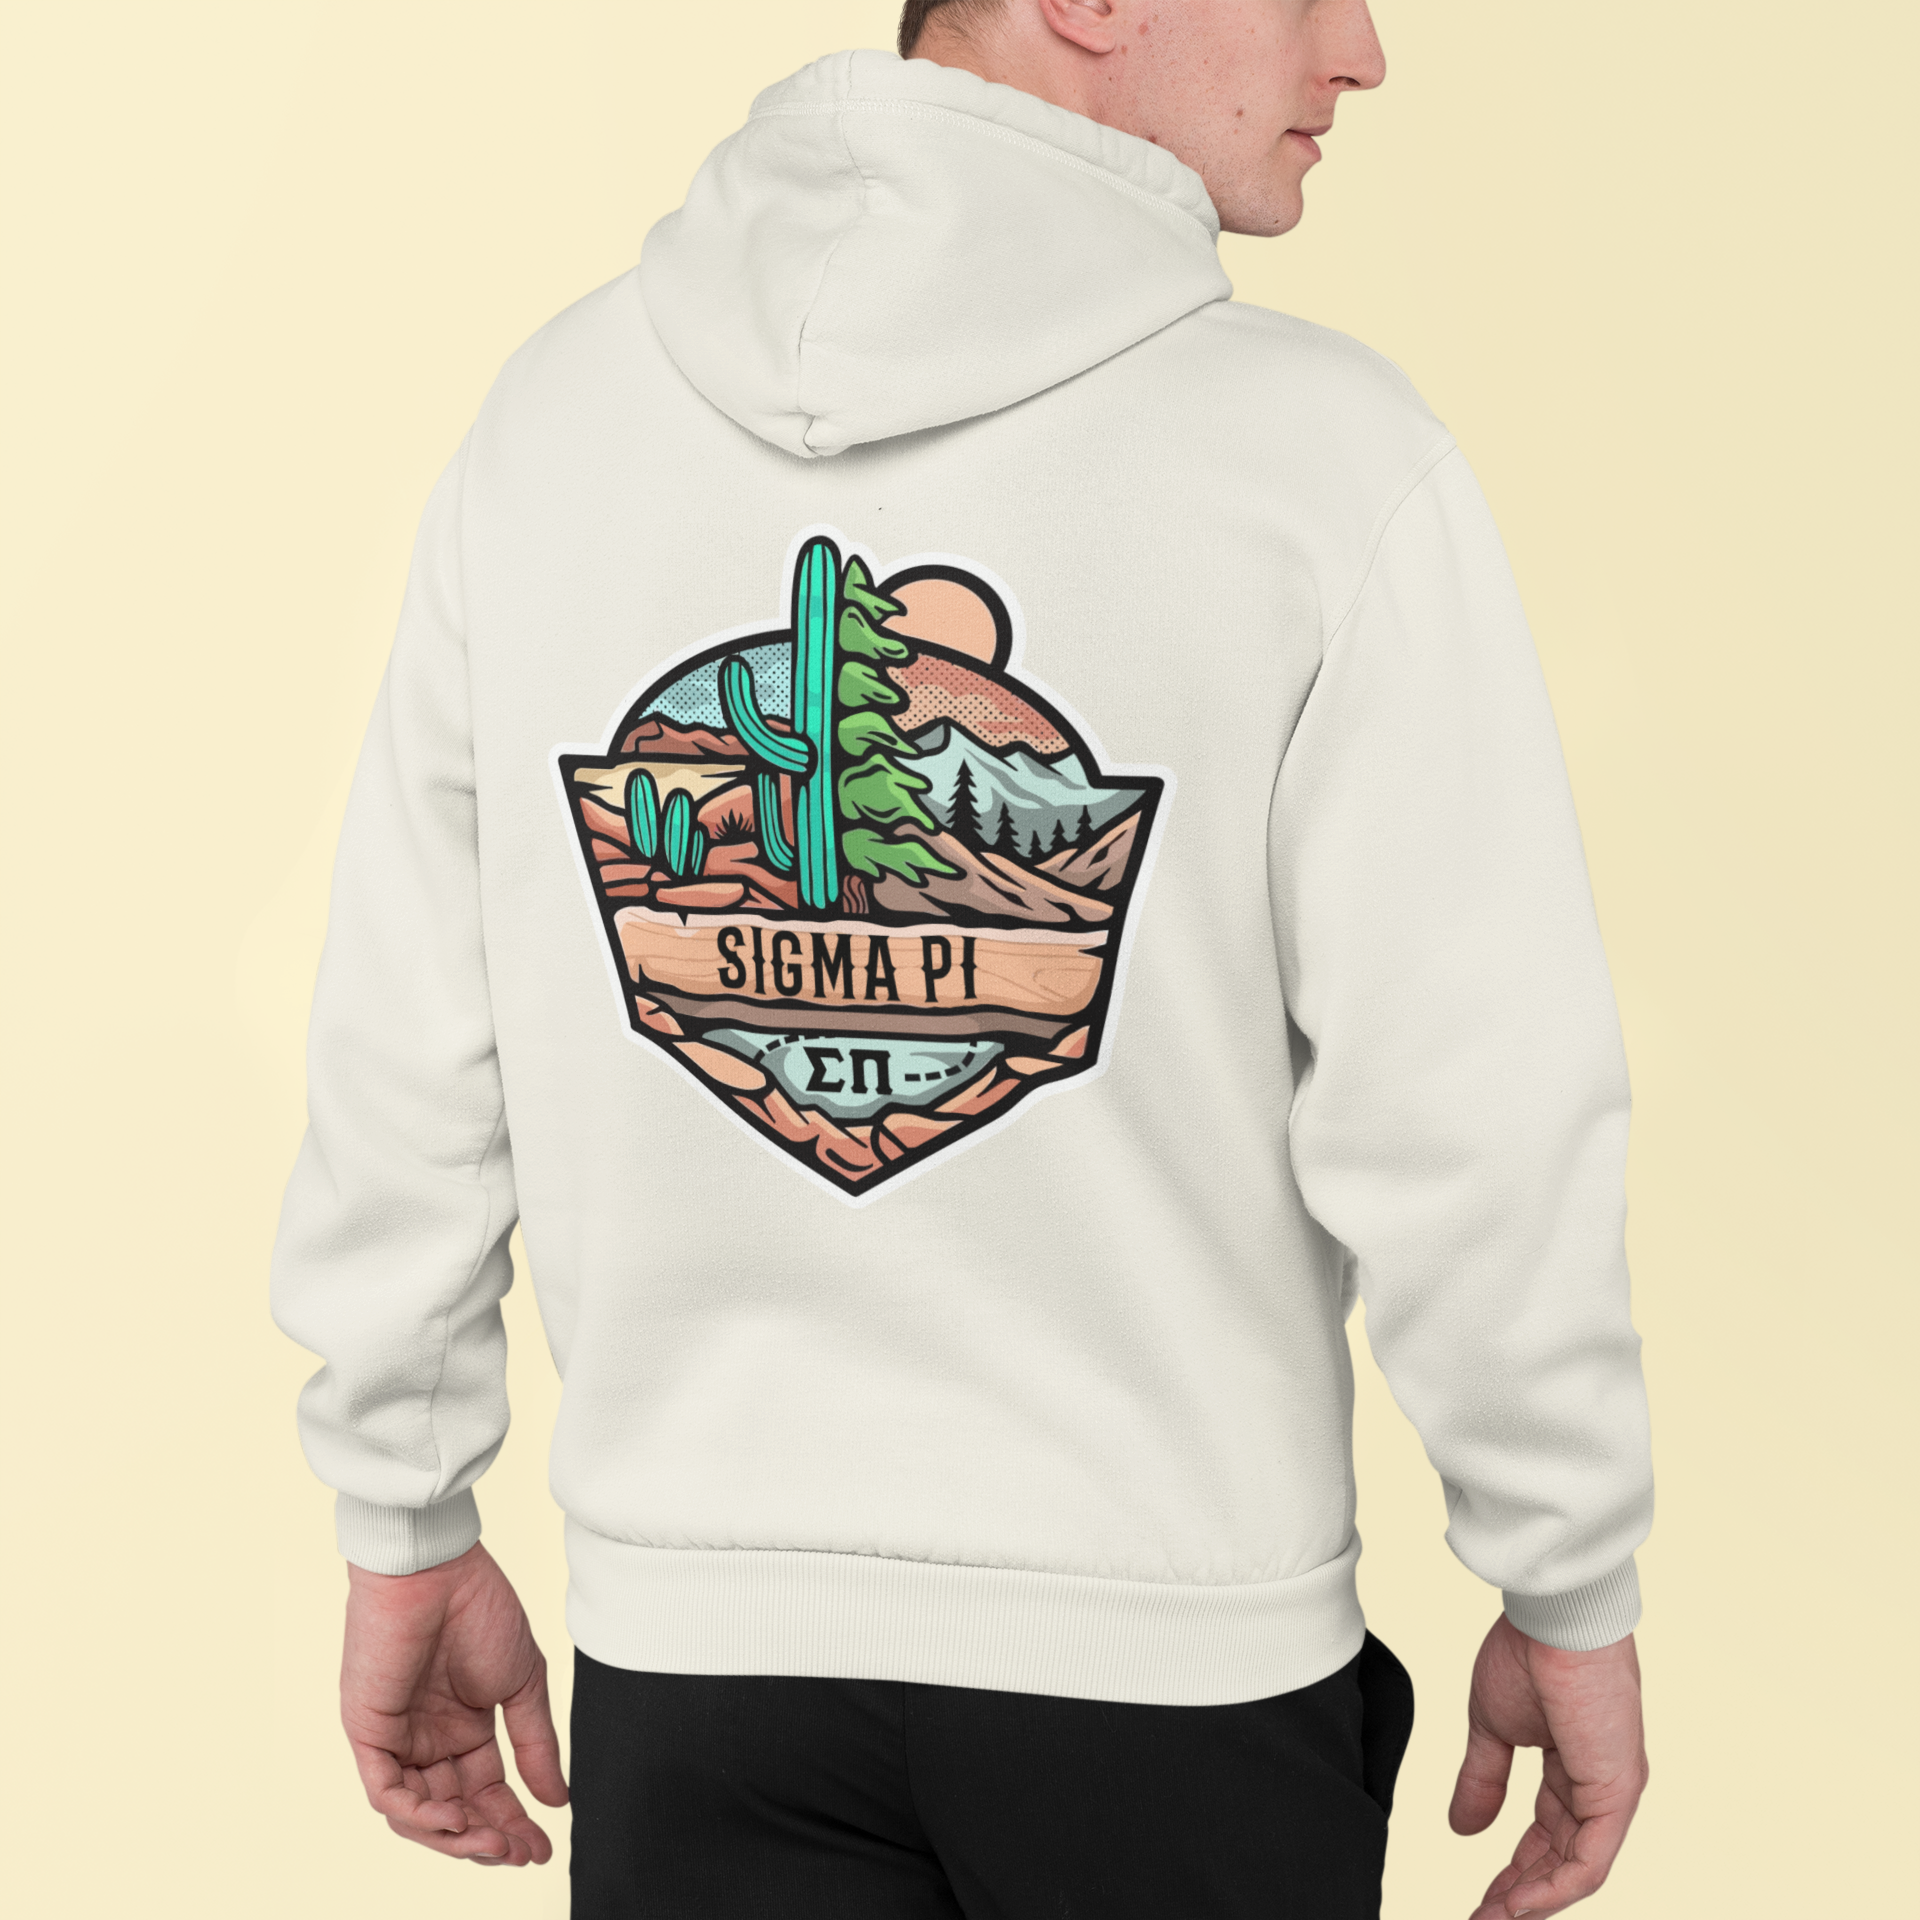 White Sigma Pi Graphic Hoodie | Desert Mountains | Sigma Pi Apparel and Merchandise back model 